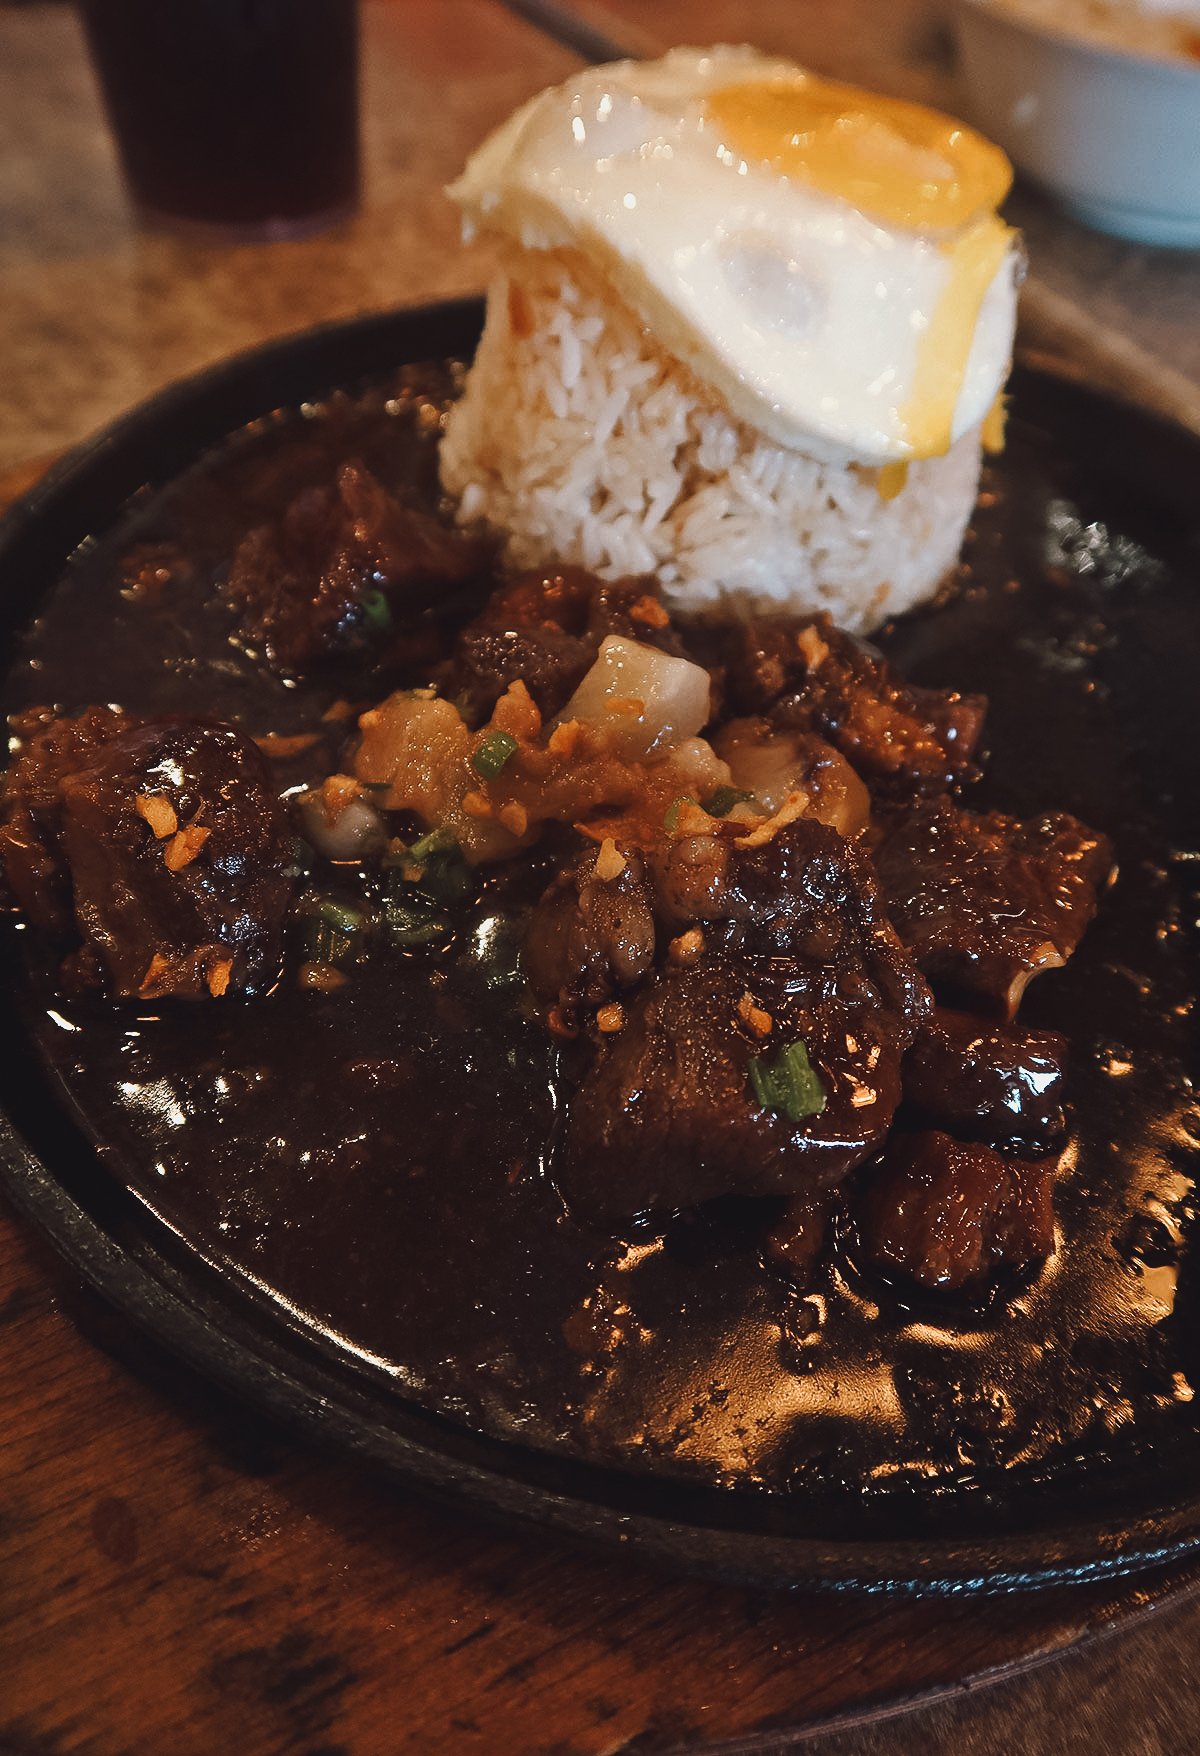 Beef pares at a restaurant in Manila